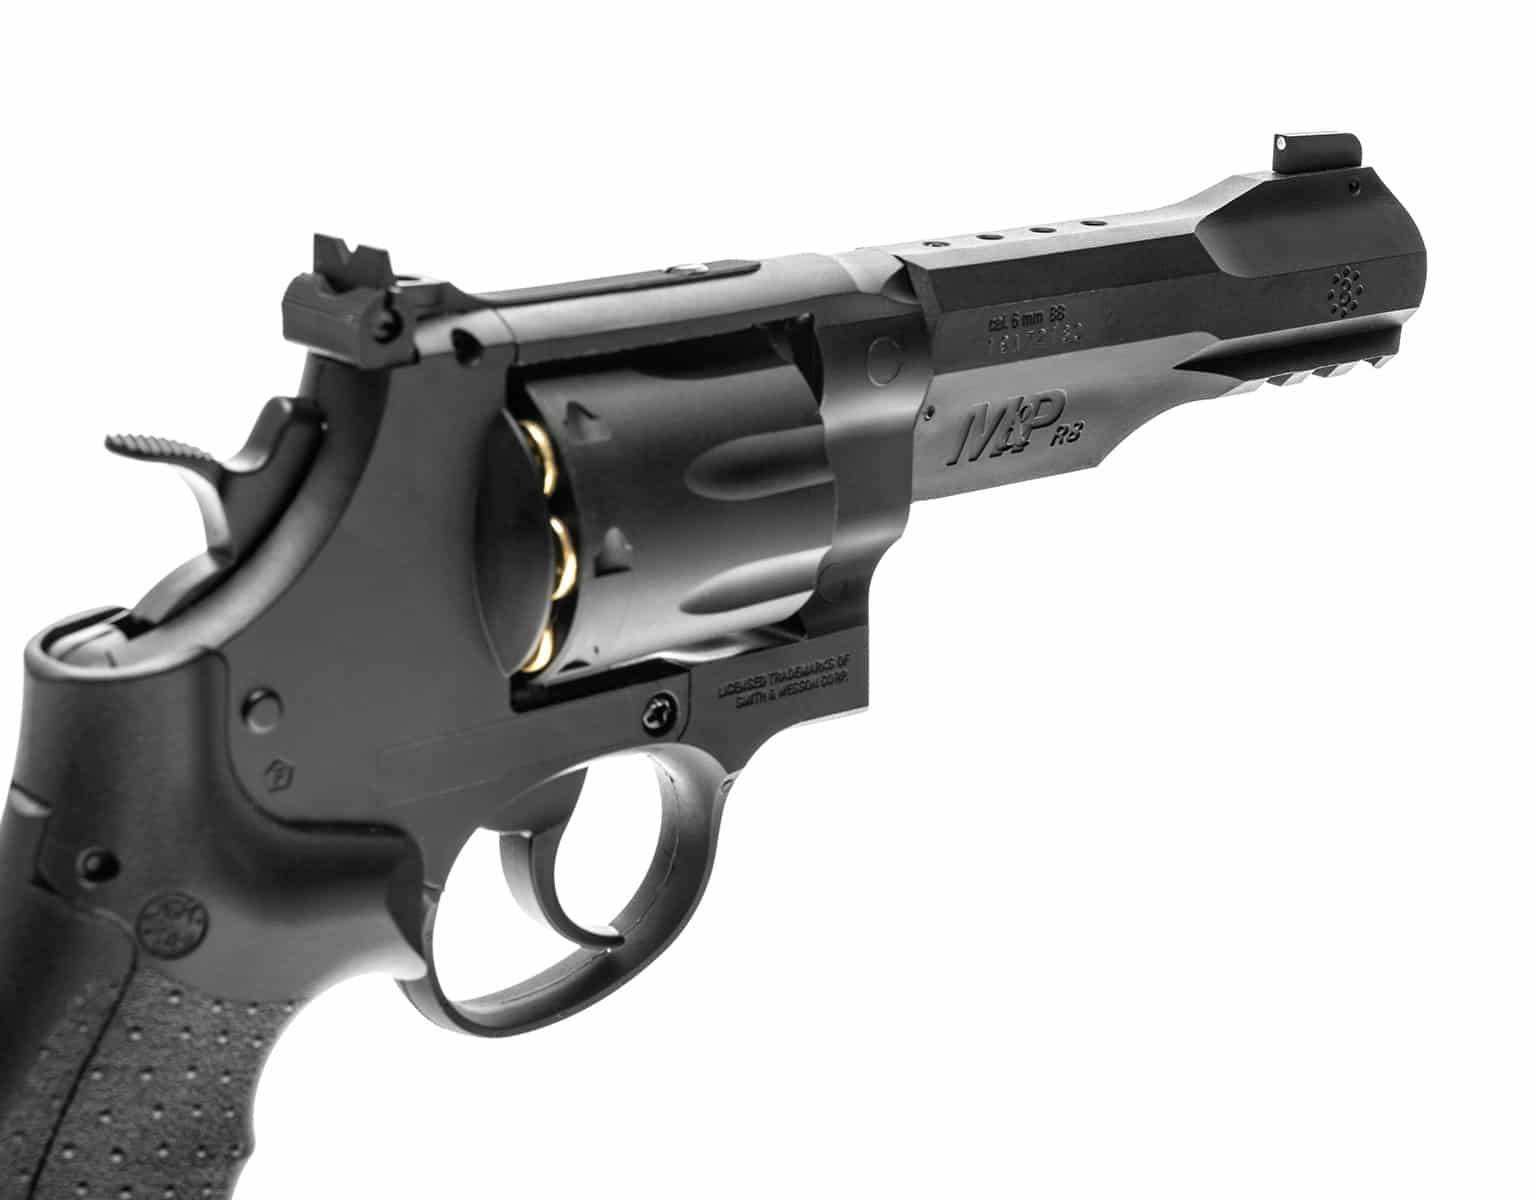 Smith & Wesson M&P R8 cal. 6 mm BB 